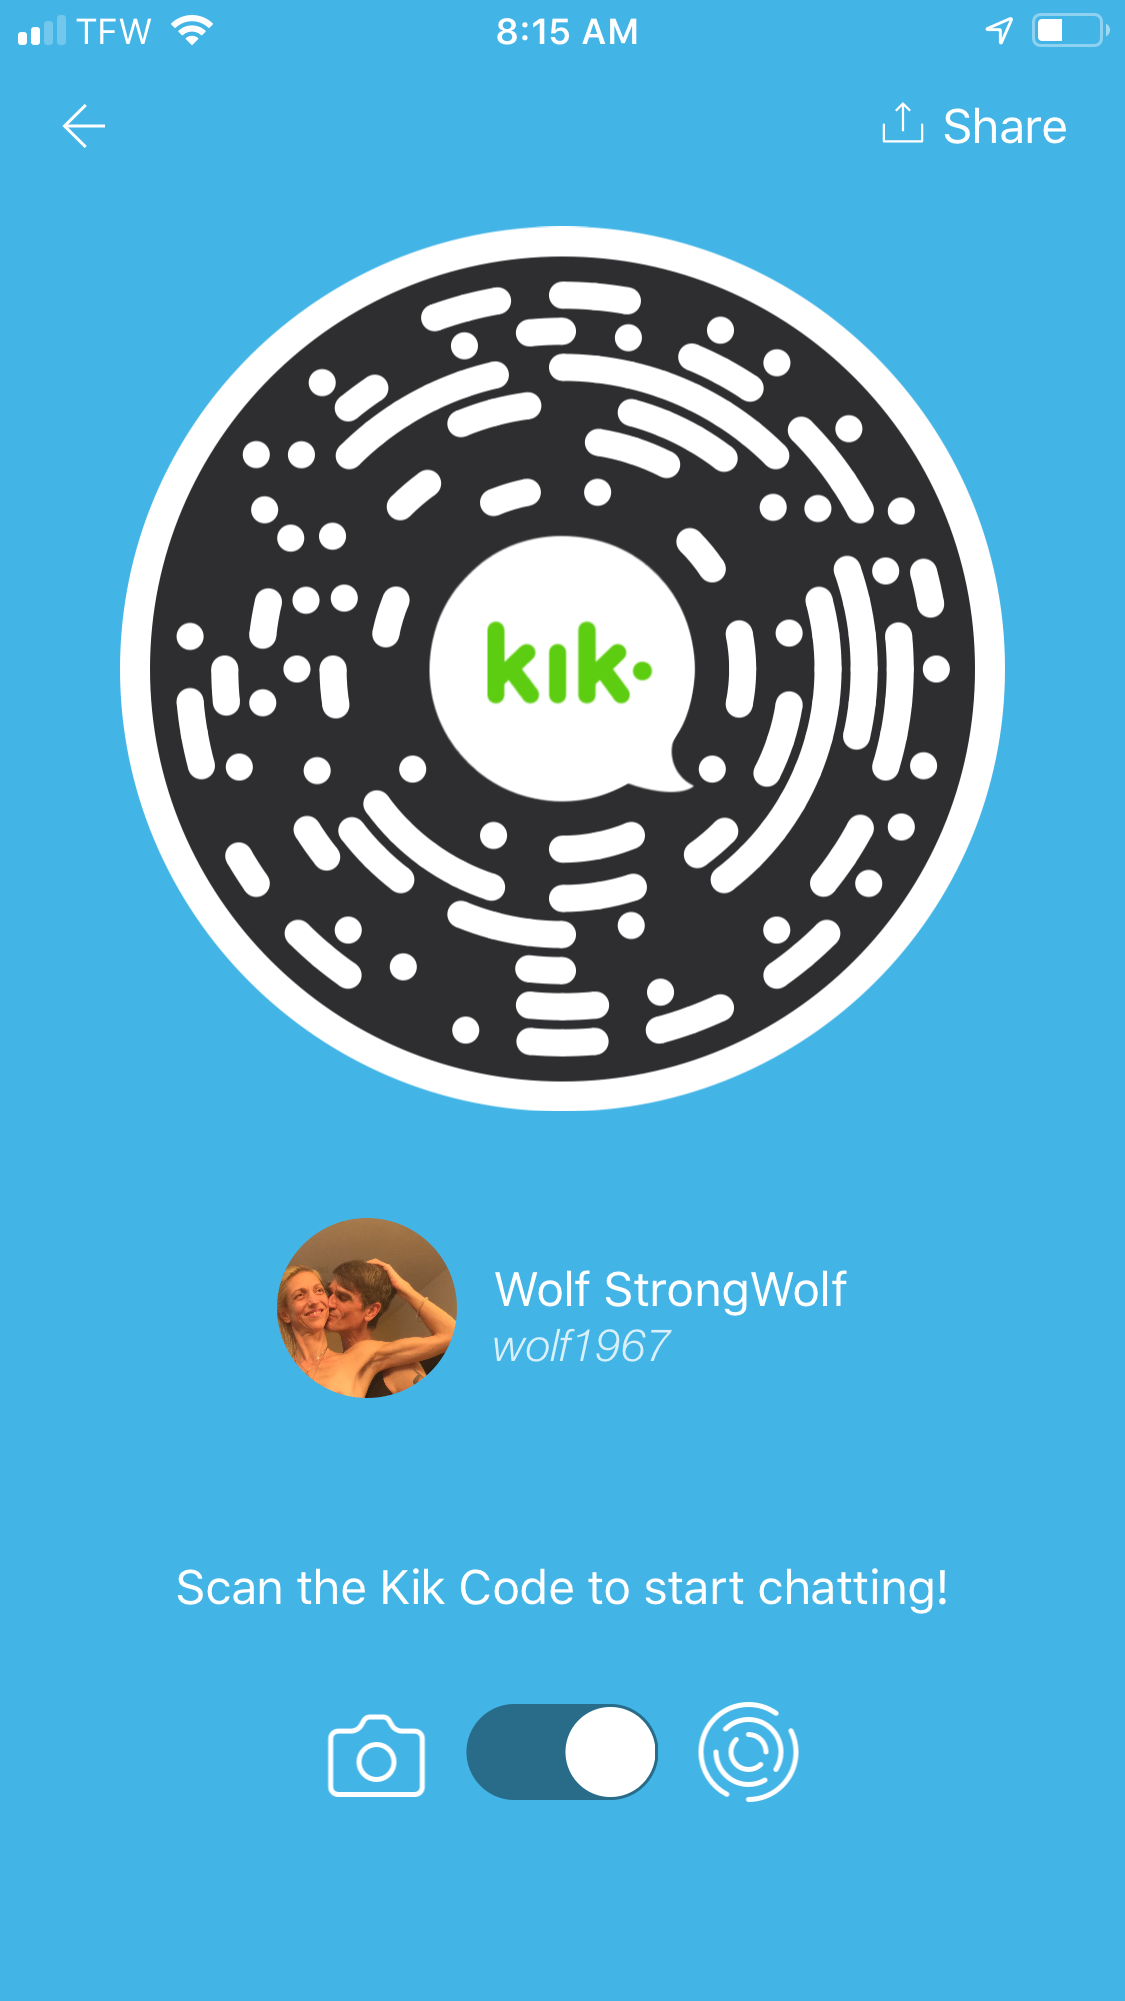 Photo by StrongWolf with the username @StrongWolf, who is a verified user,  May 5, 2019 at 12:32 PM. The post is about the topic Kik and the text says 'Couple from SW Fla looking for Life meets and Kik exchanges 

Contact us : Wolf1967 and HeavenlyDirtyAngel'